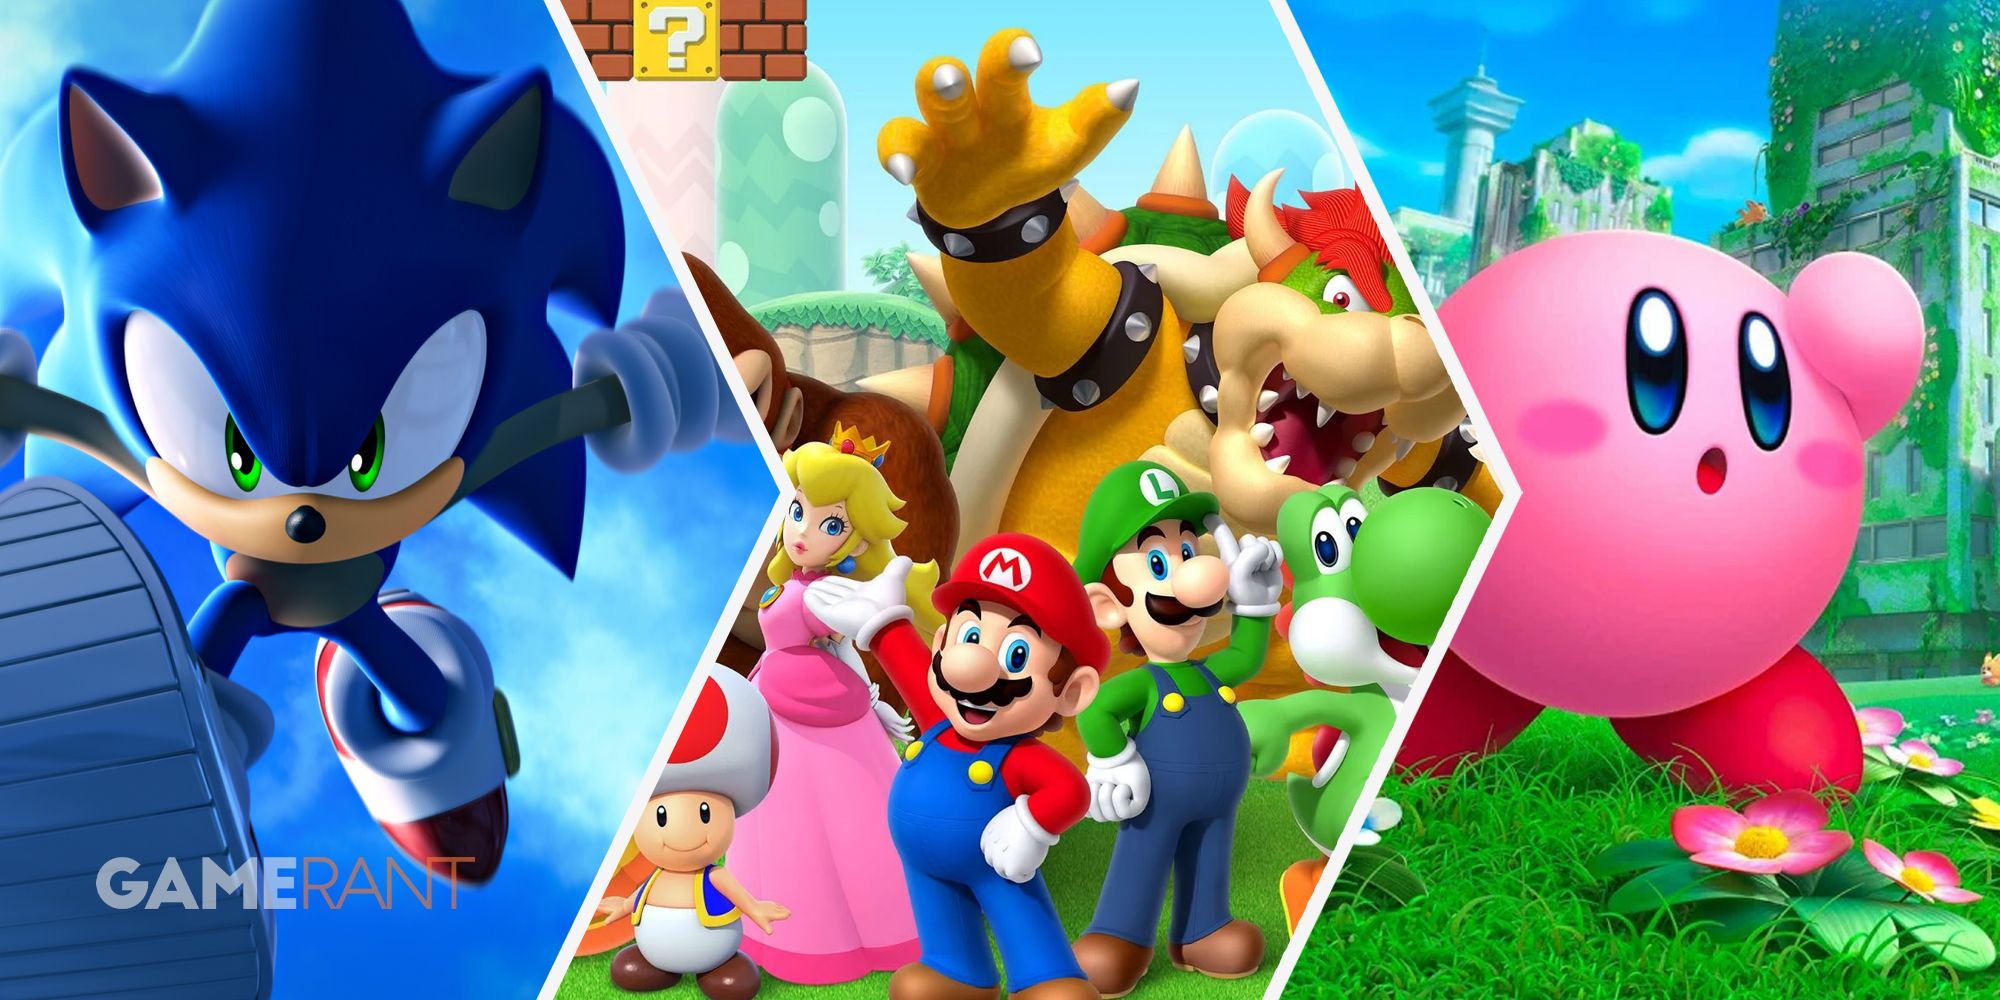 Sonic from Sonic the Hedgehog on left, Mario, Luigi, Yoshi, Toad, Peach, Bowser posing in middle, Kirby from Kirby and the Forgotten Land on right